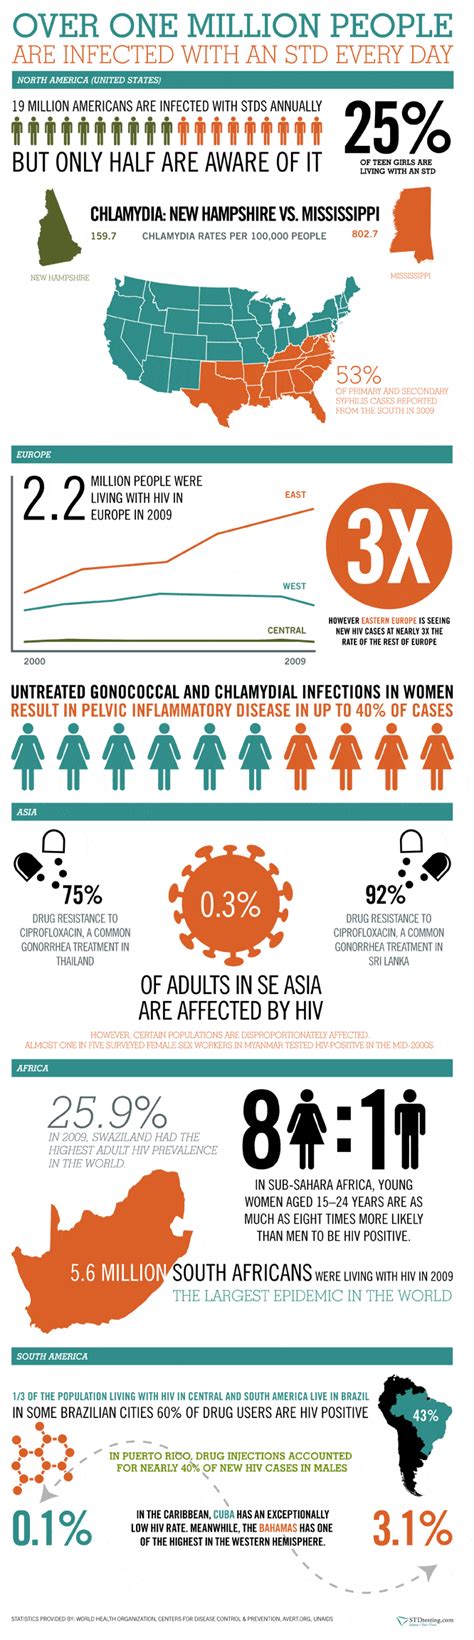 Global Impact Of Stds Daily Infographic